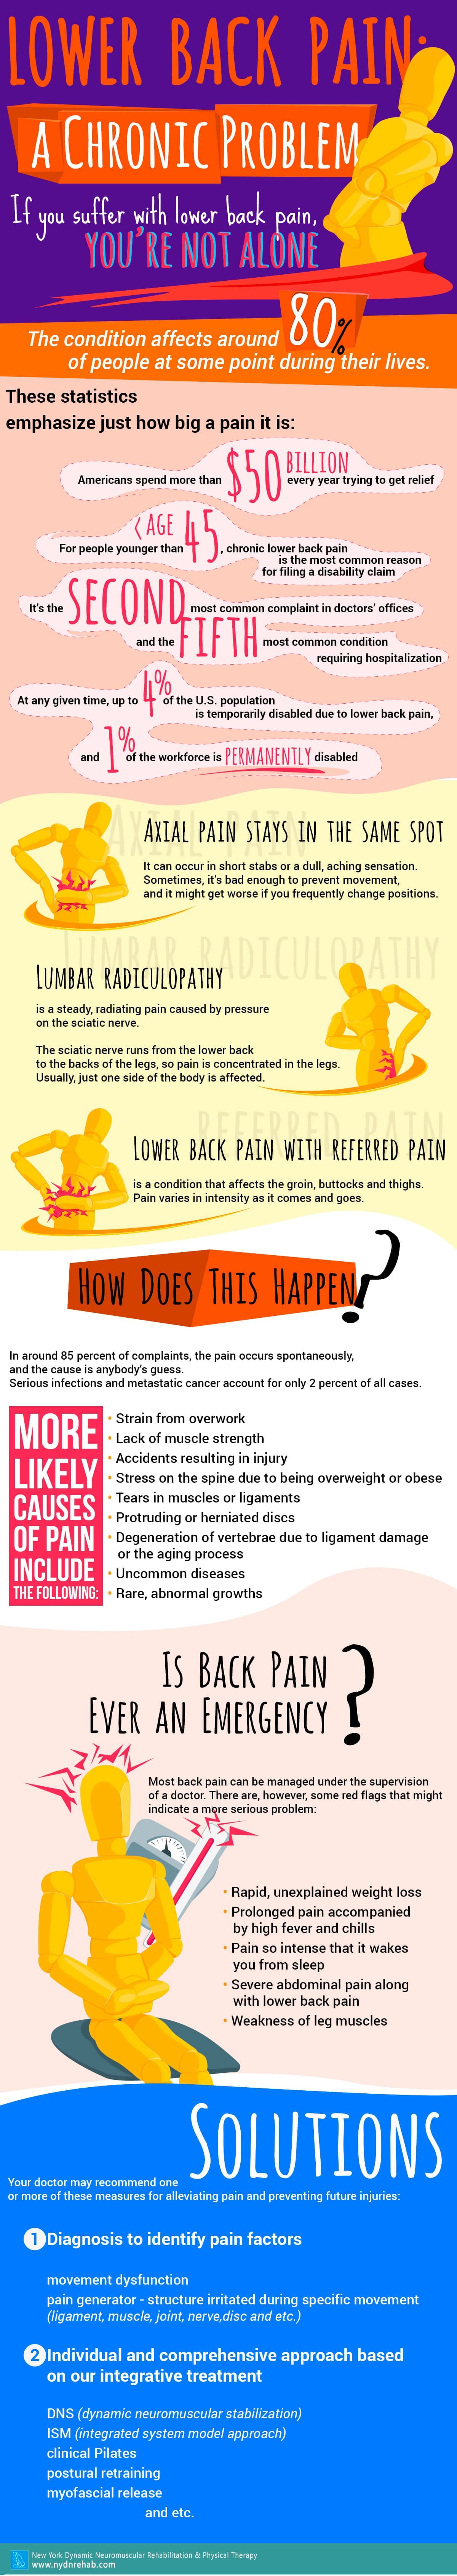 Lower Back Pain A Chronic Problem